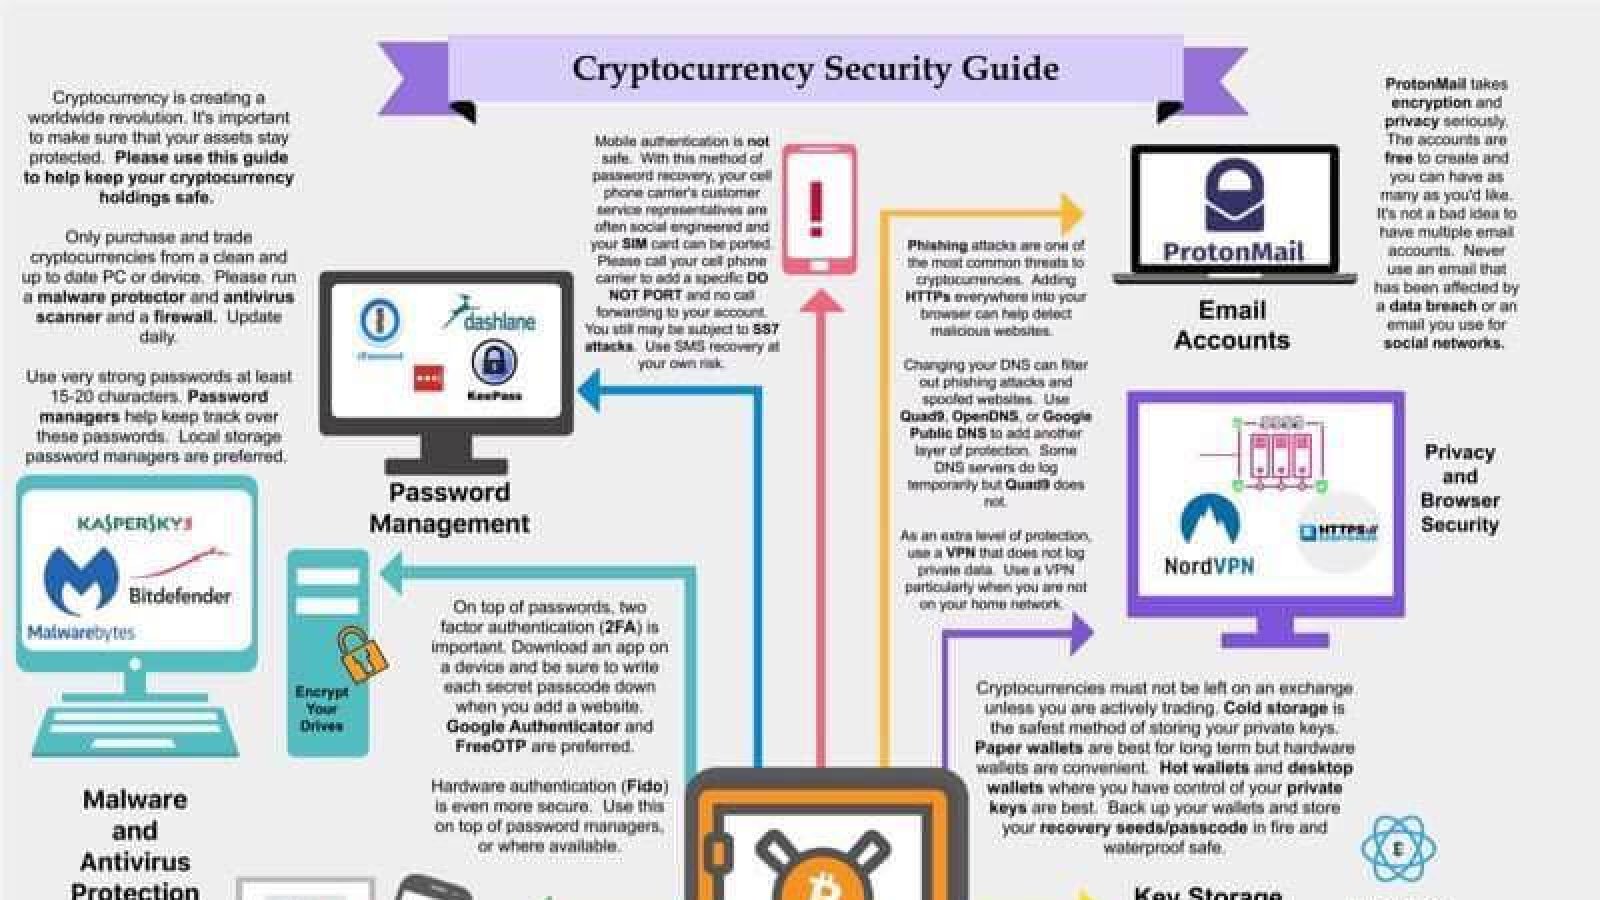 Cryptocurrency safety requires a complex approach